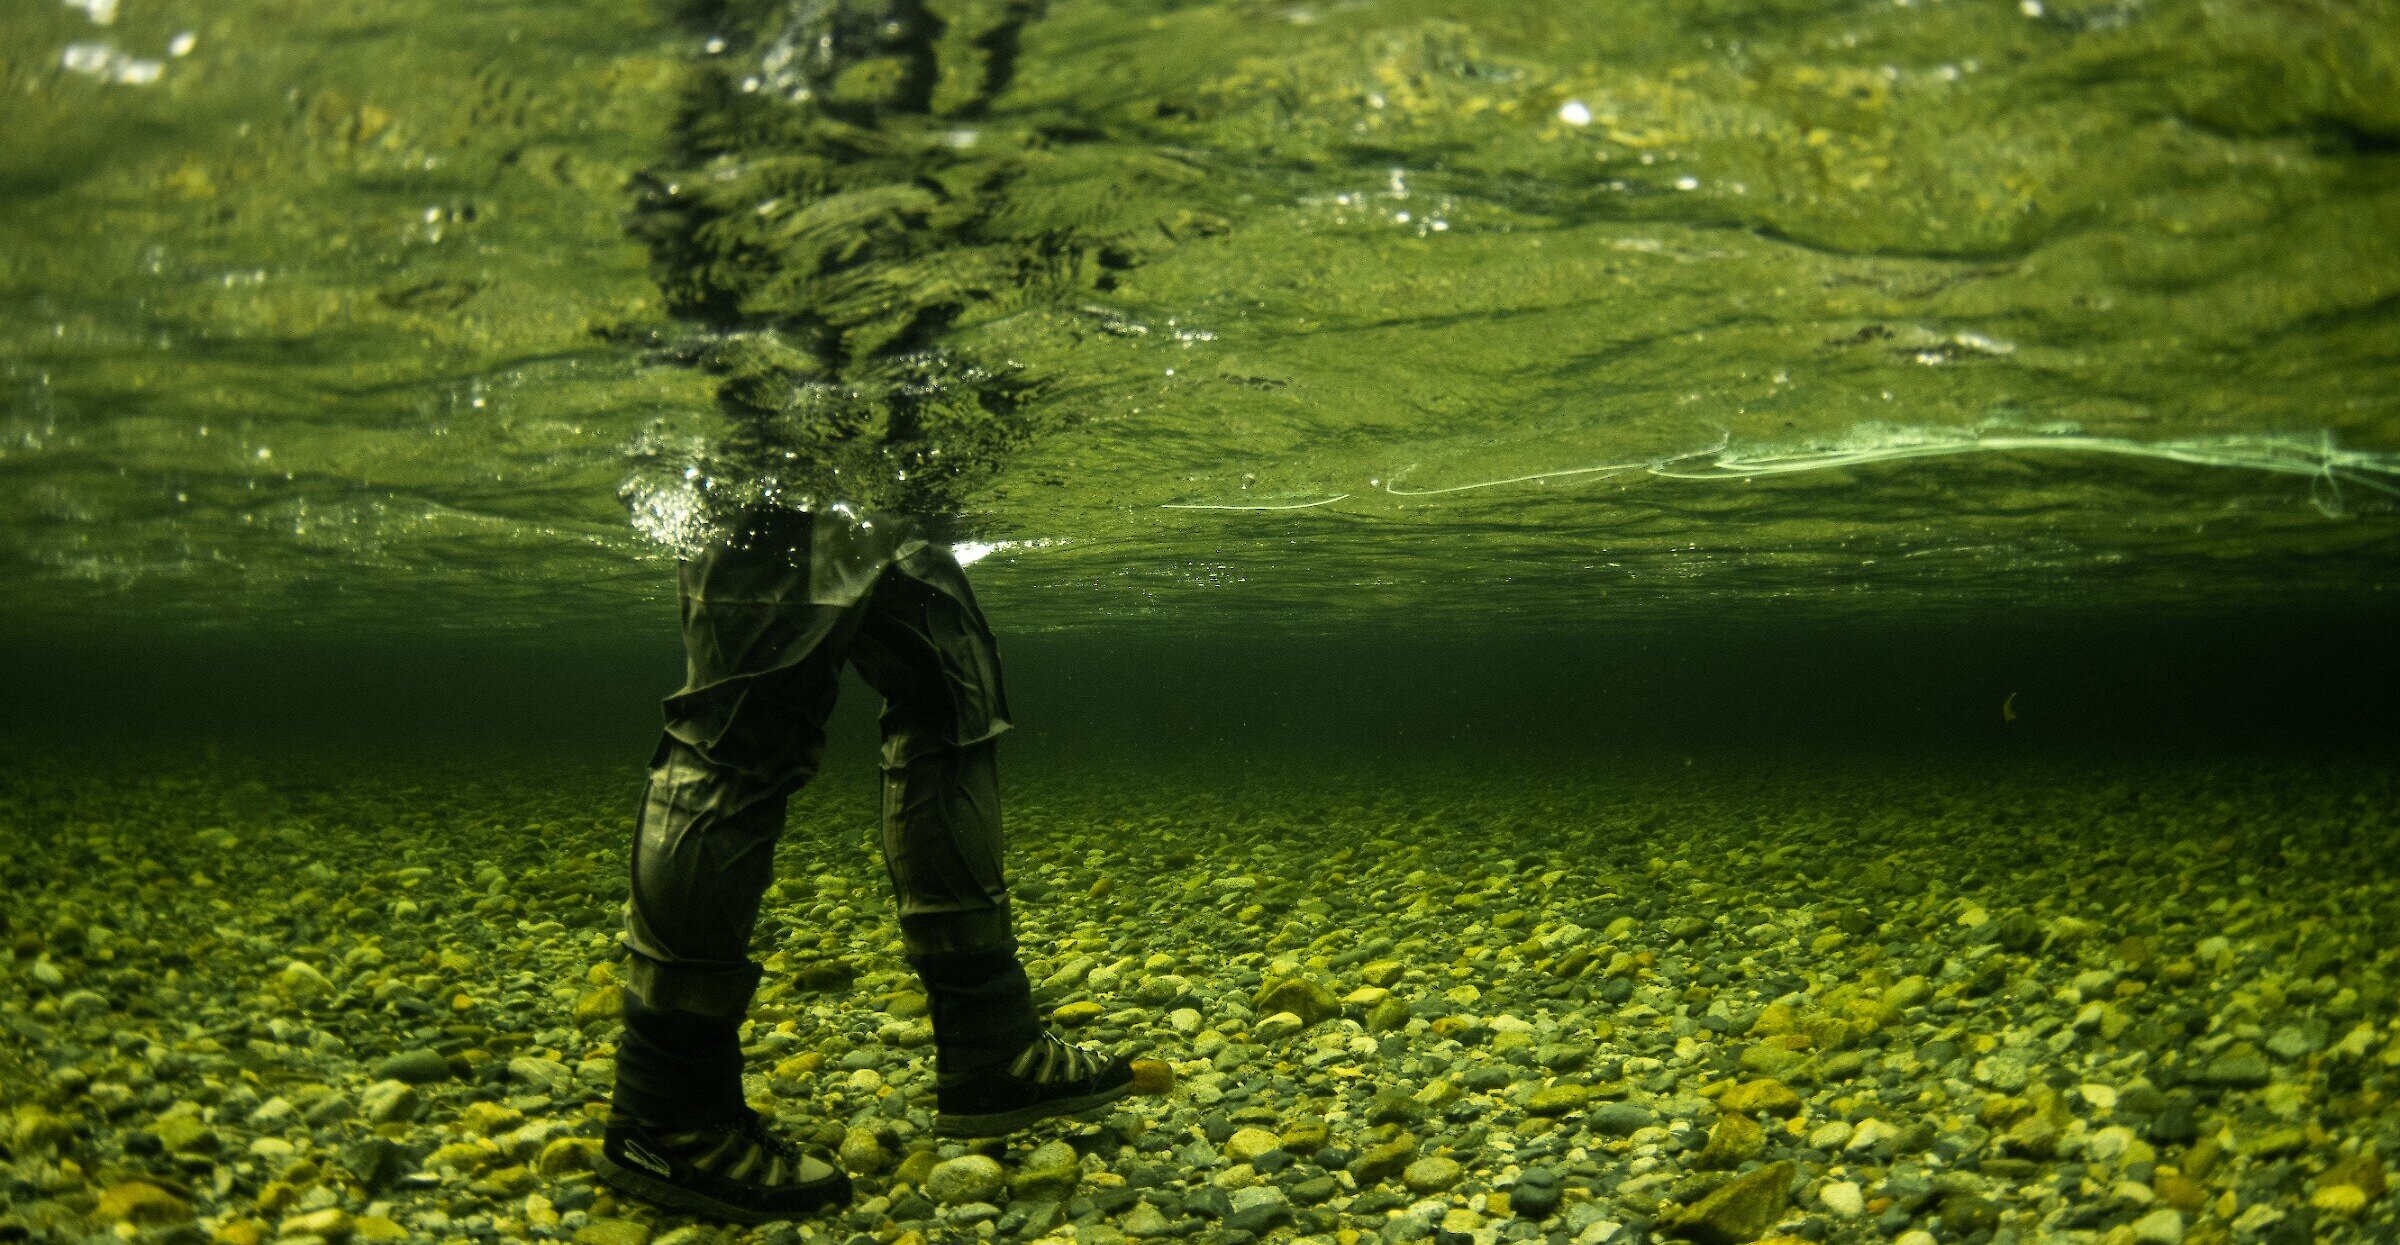 Underwater image of a person with hip waders on fly fishing in the river